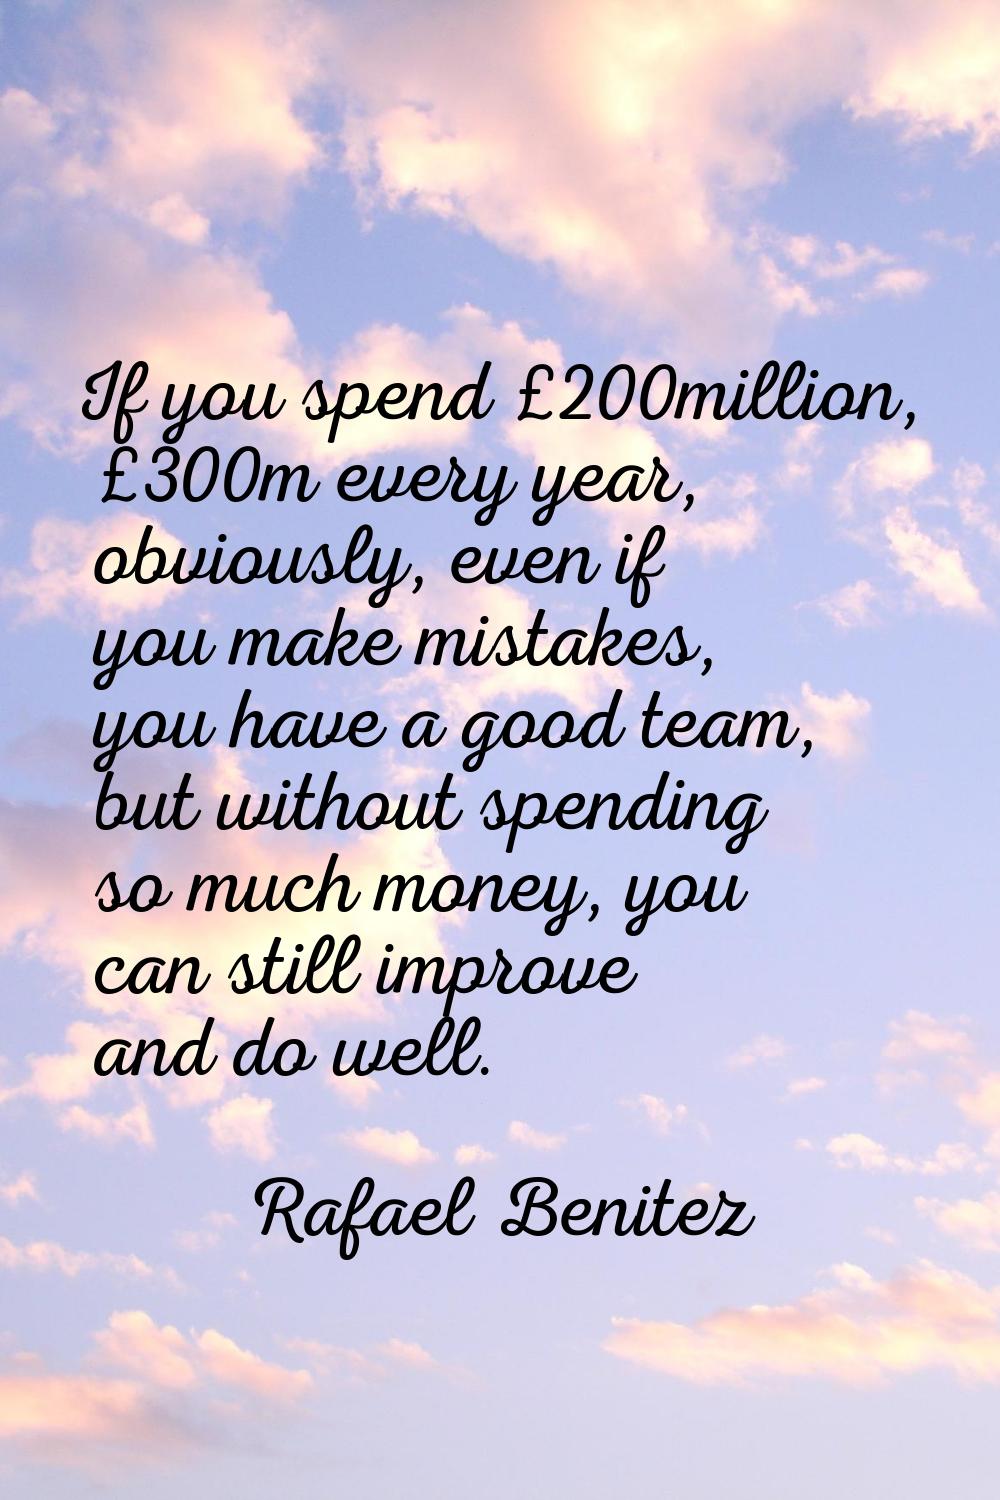 If you spend £200million, £300m every year, obviously, even if you make mistakes, you have a good t